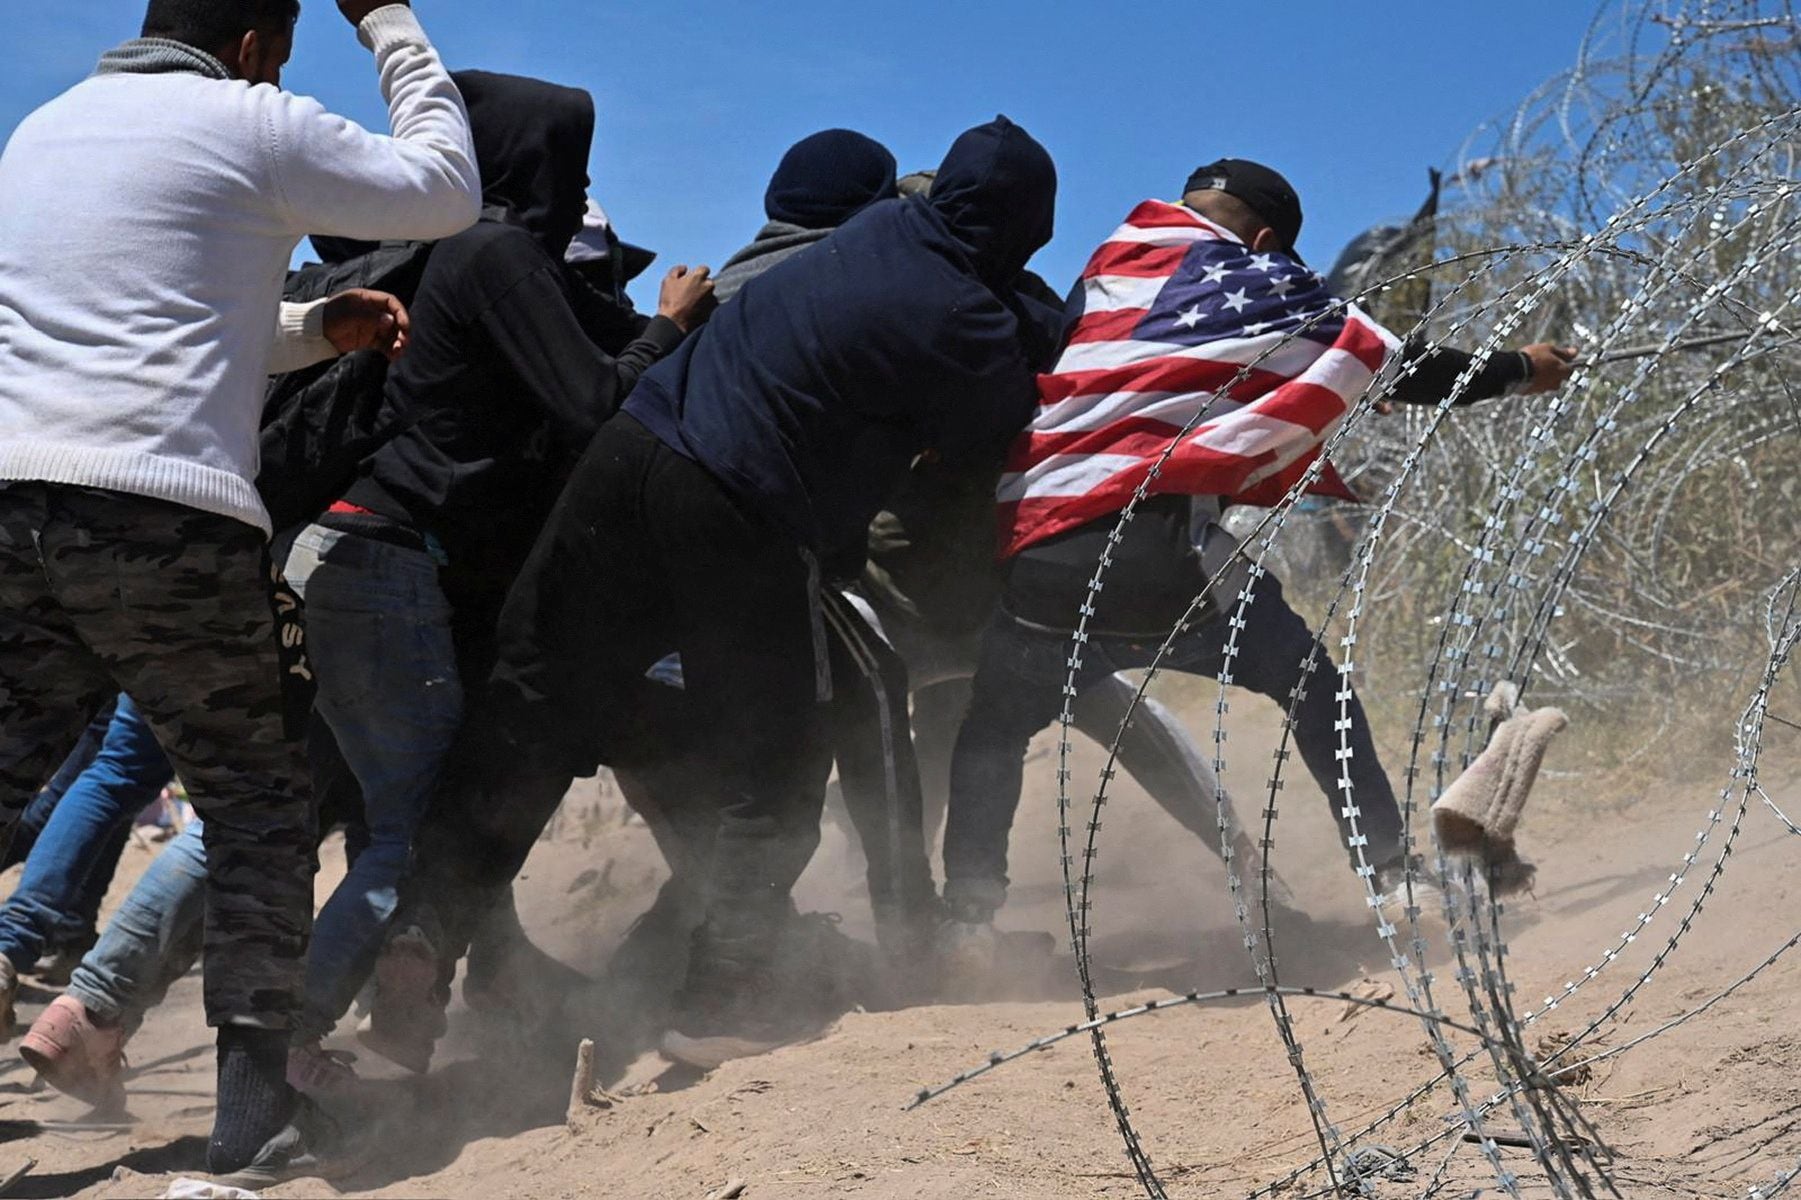 A group of migrants attempts to break through concertina wire in El Paso, Texas, last week.